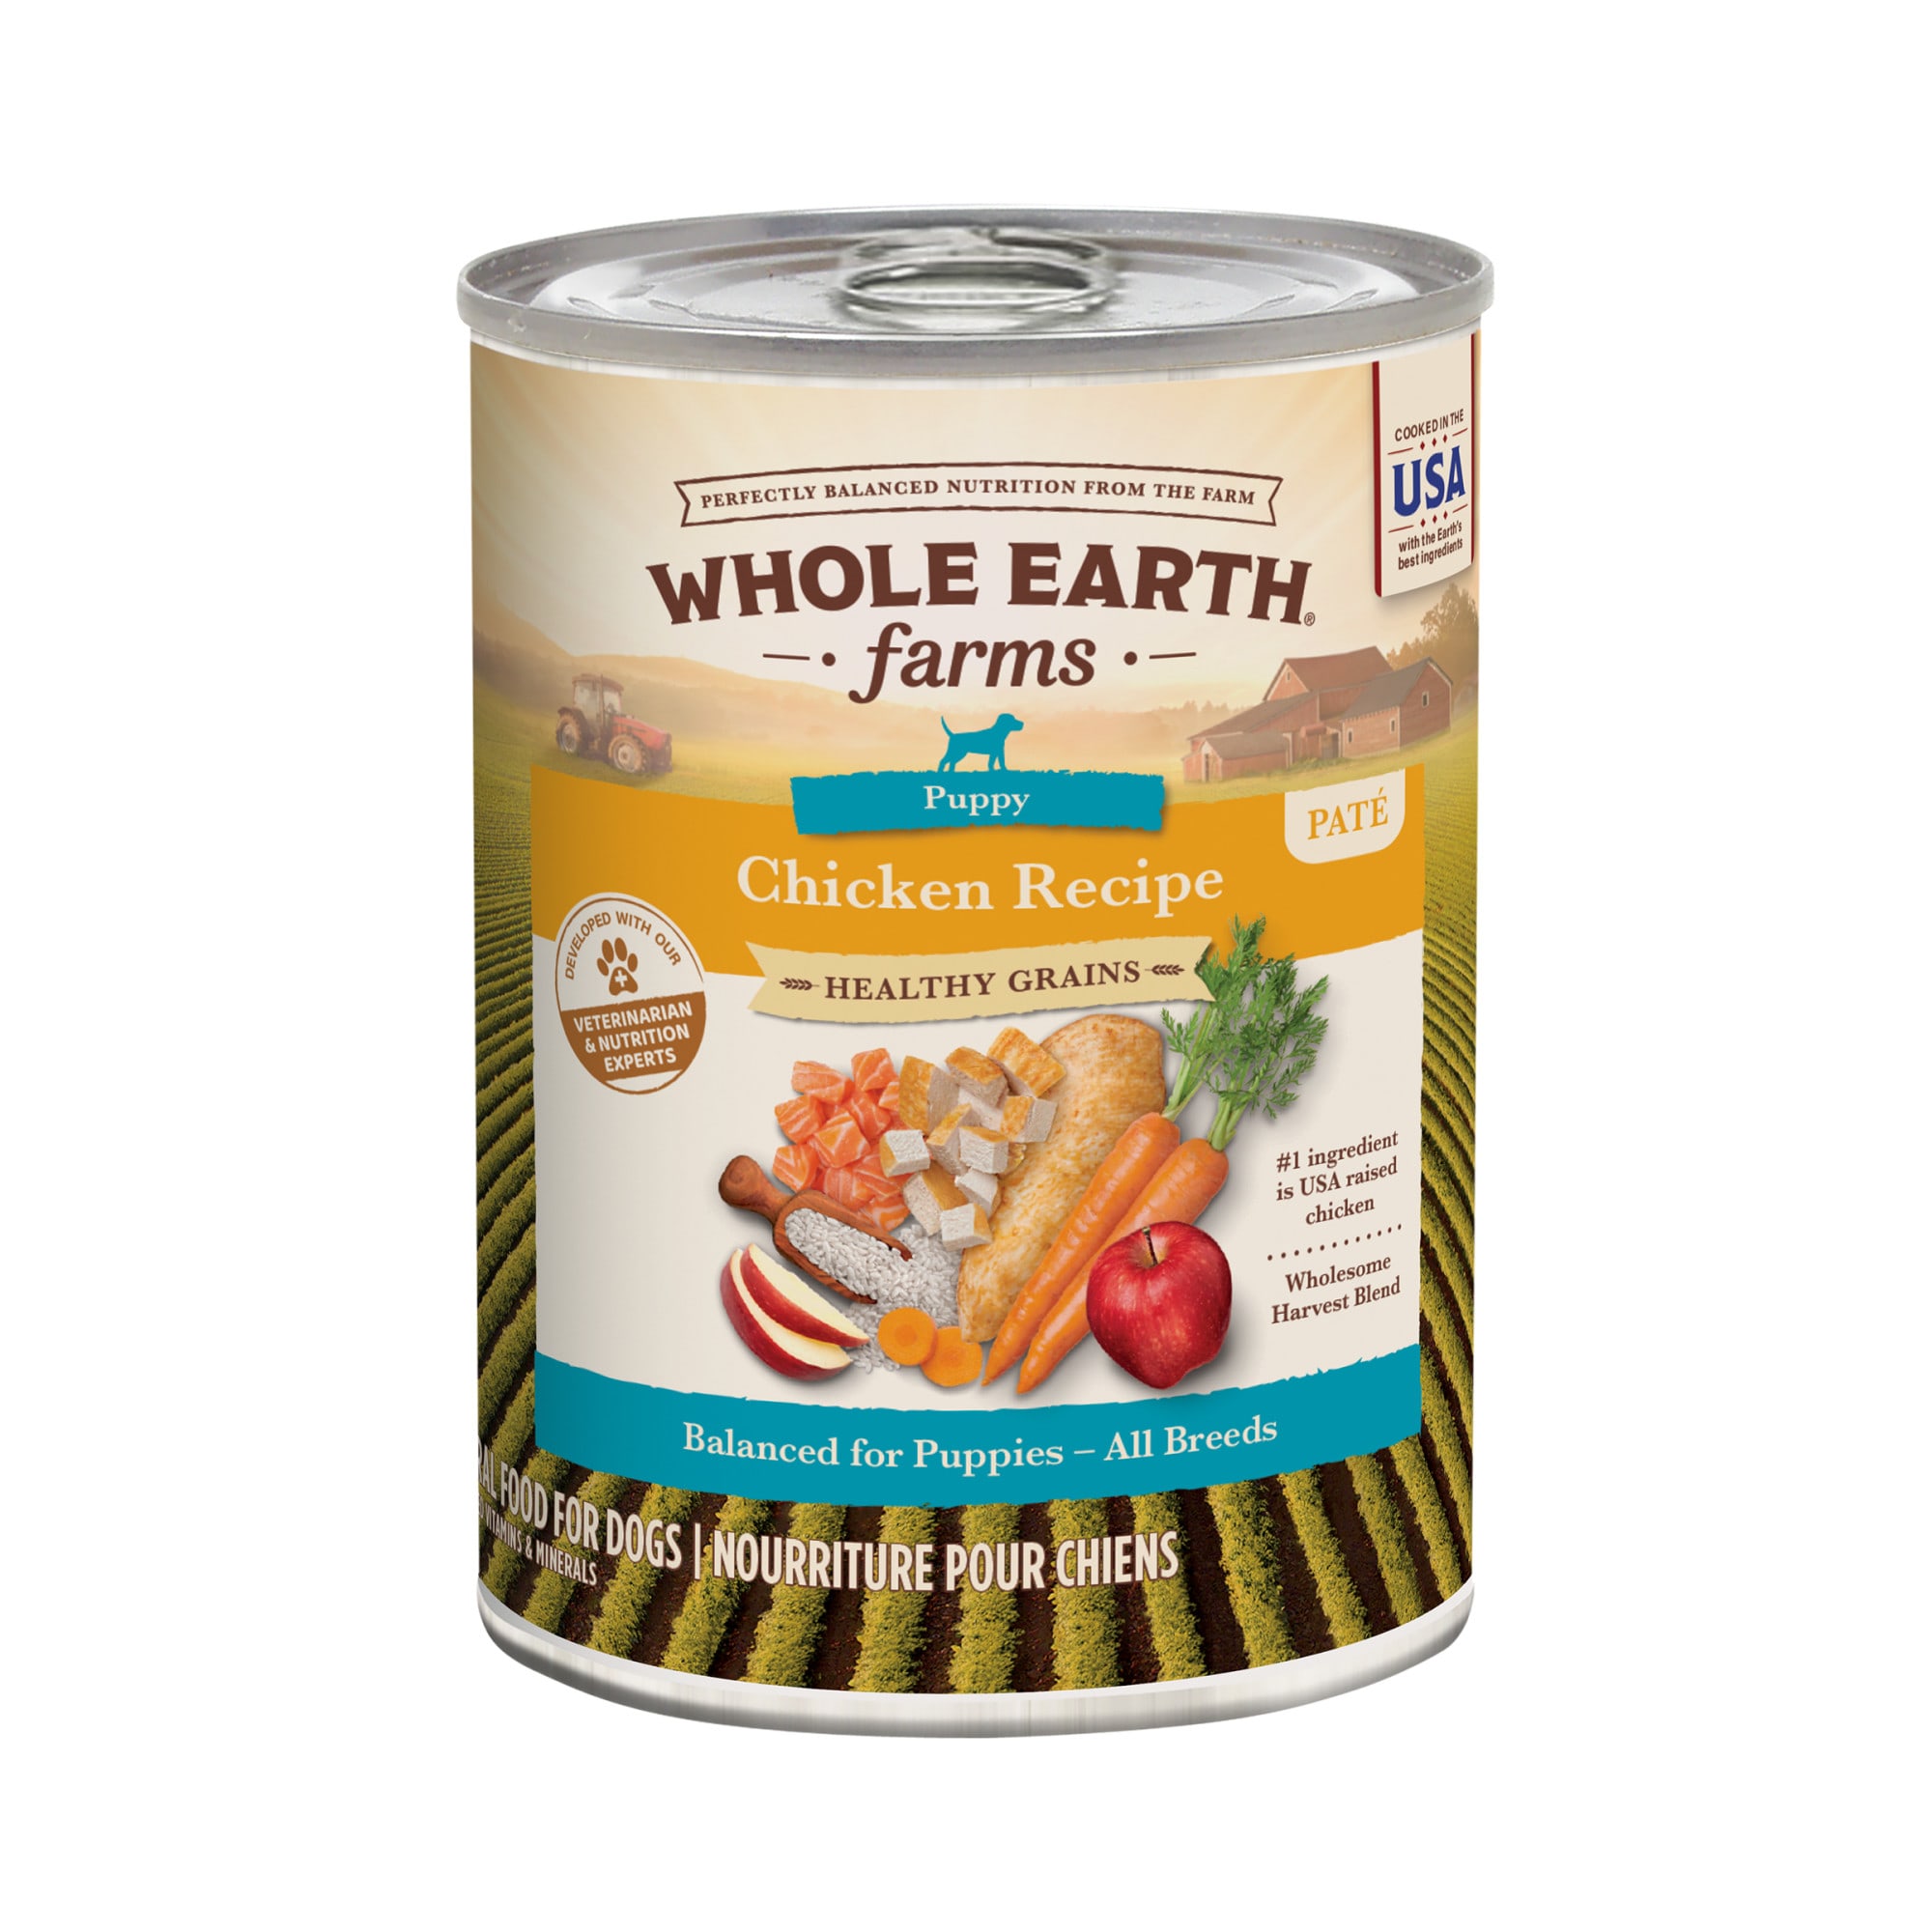 Whole Earth Farms Healthy Grains Puppy Recipe Canned Dog Food, 12.7 oz ...